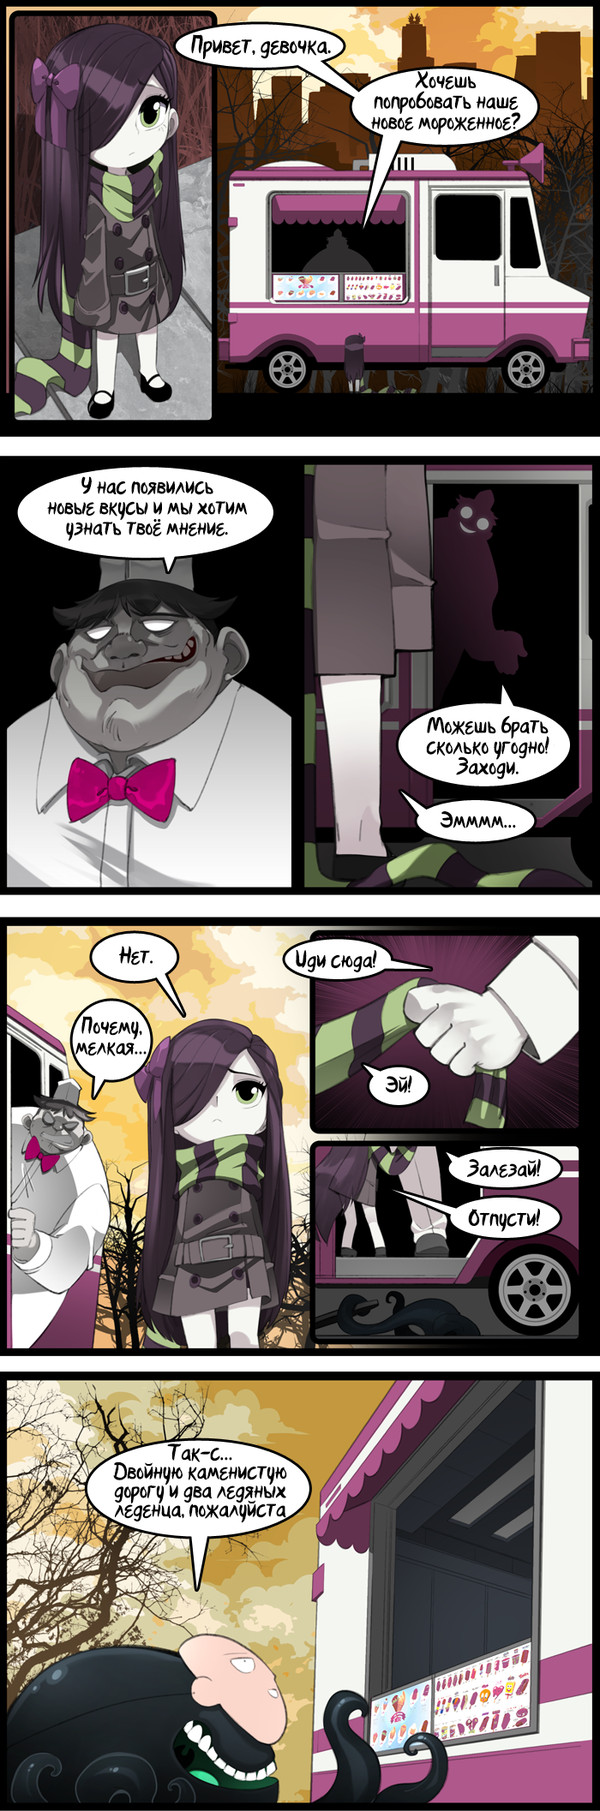 The Crawling City - Guest episode 4 - , Aria Wintermint, The crawling city, Anime art, Comics, Longpost